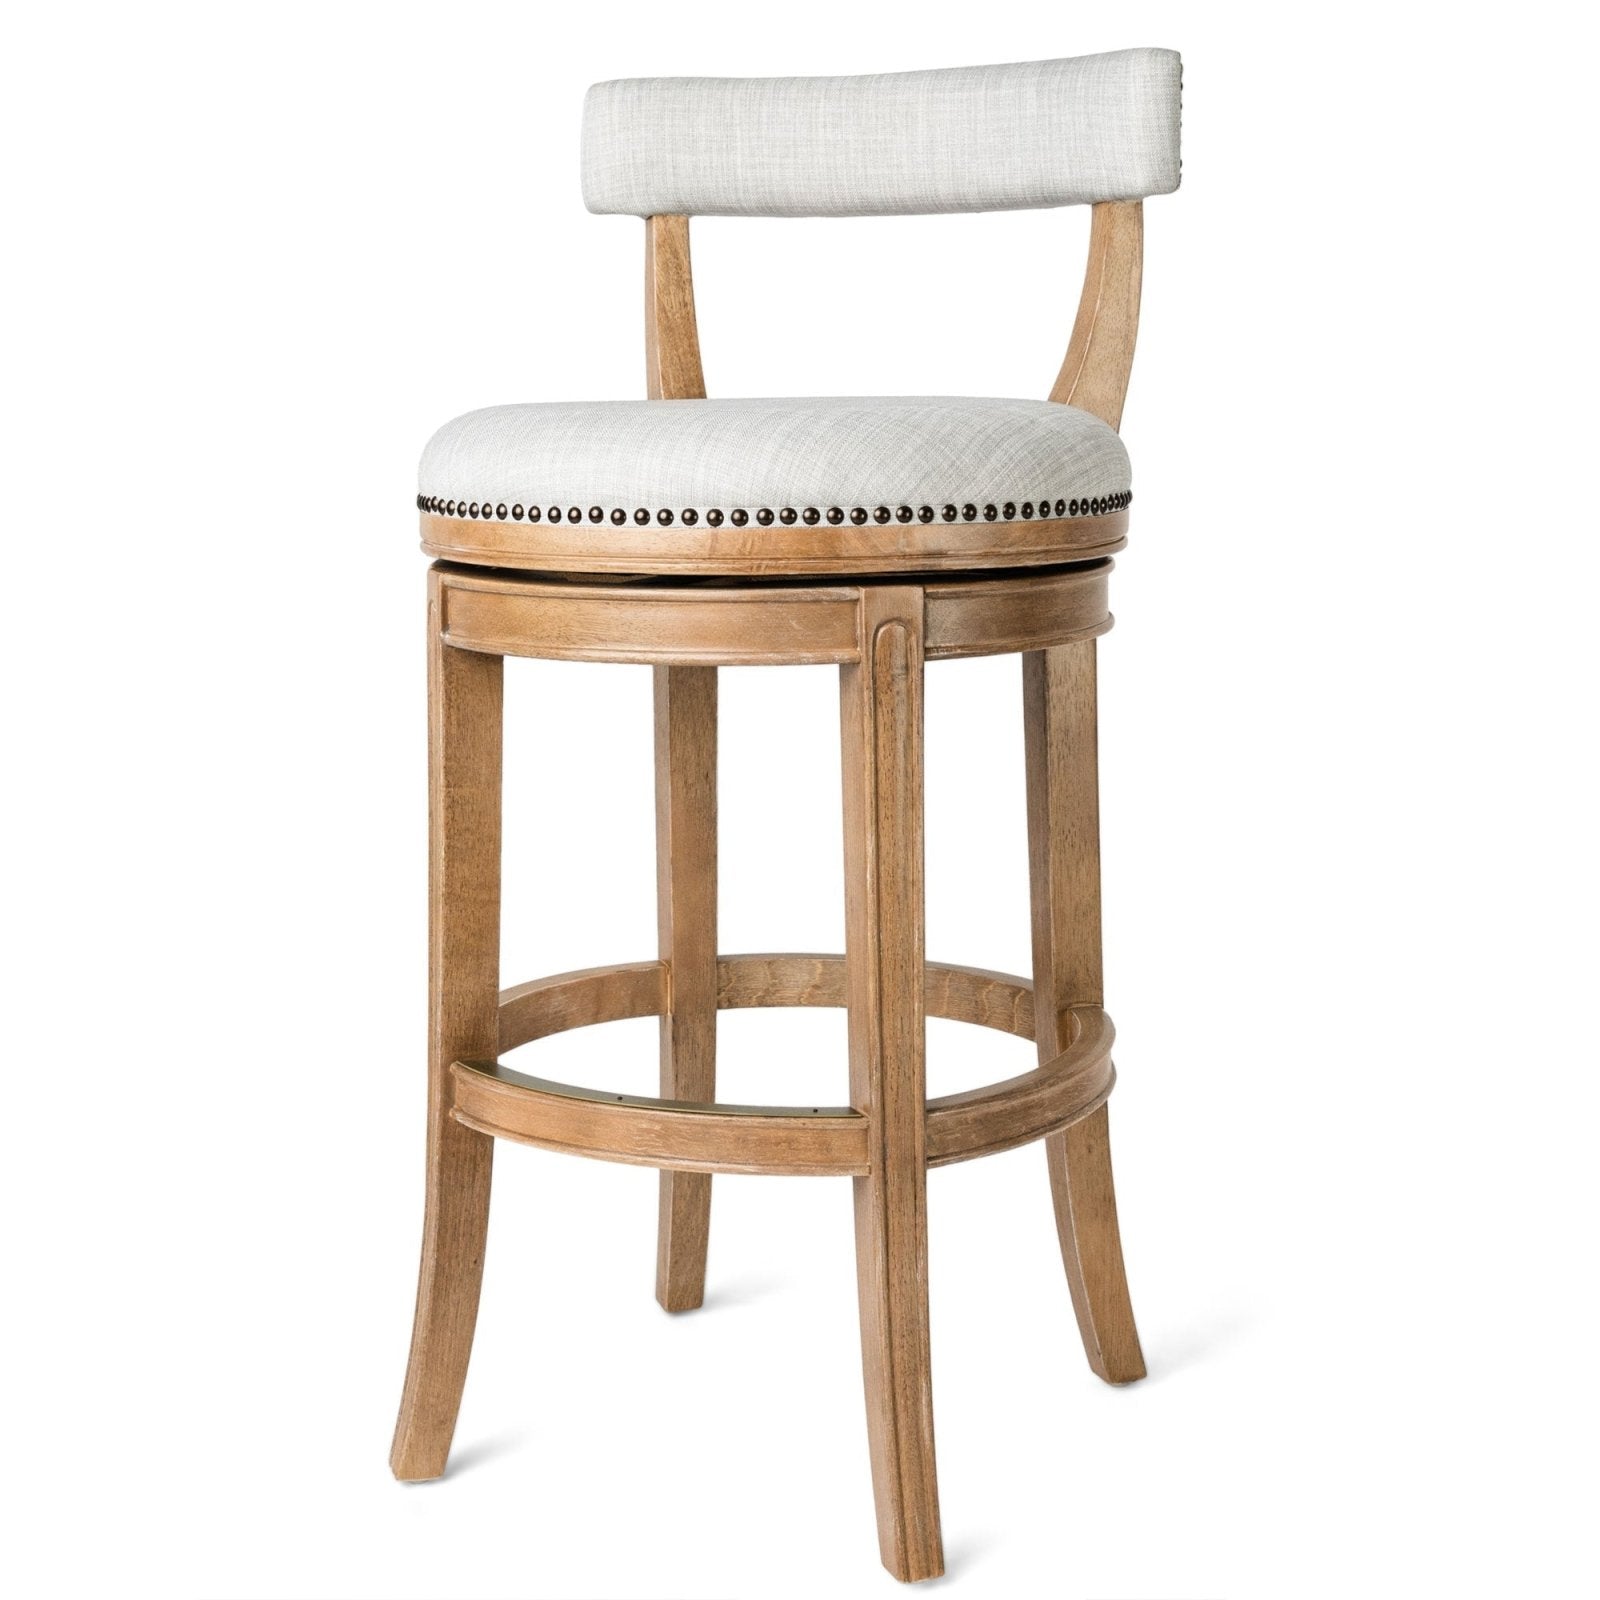 Alexander Bar Stool in Weathered Oak Finish w/ Sand Color Fabric Upholstery